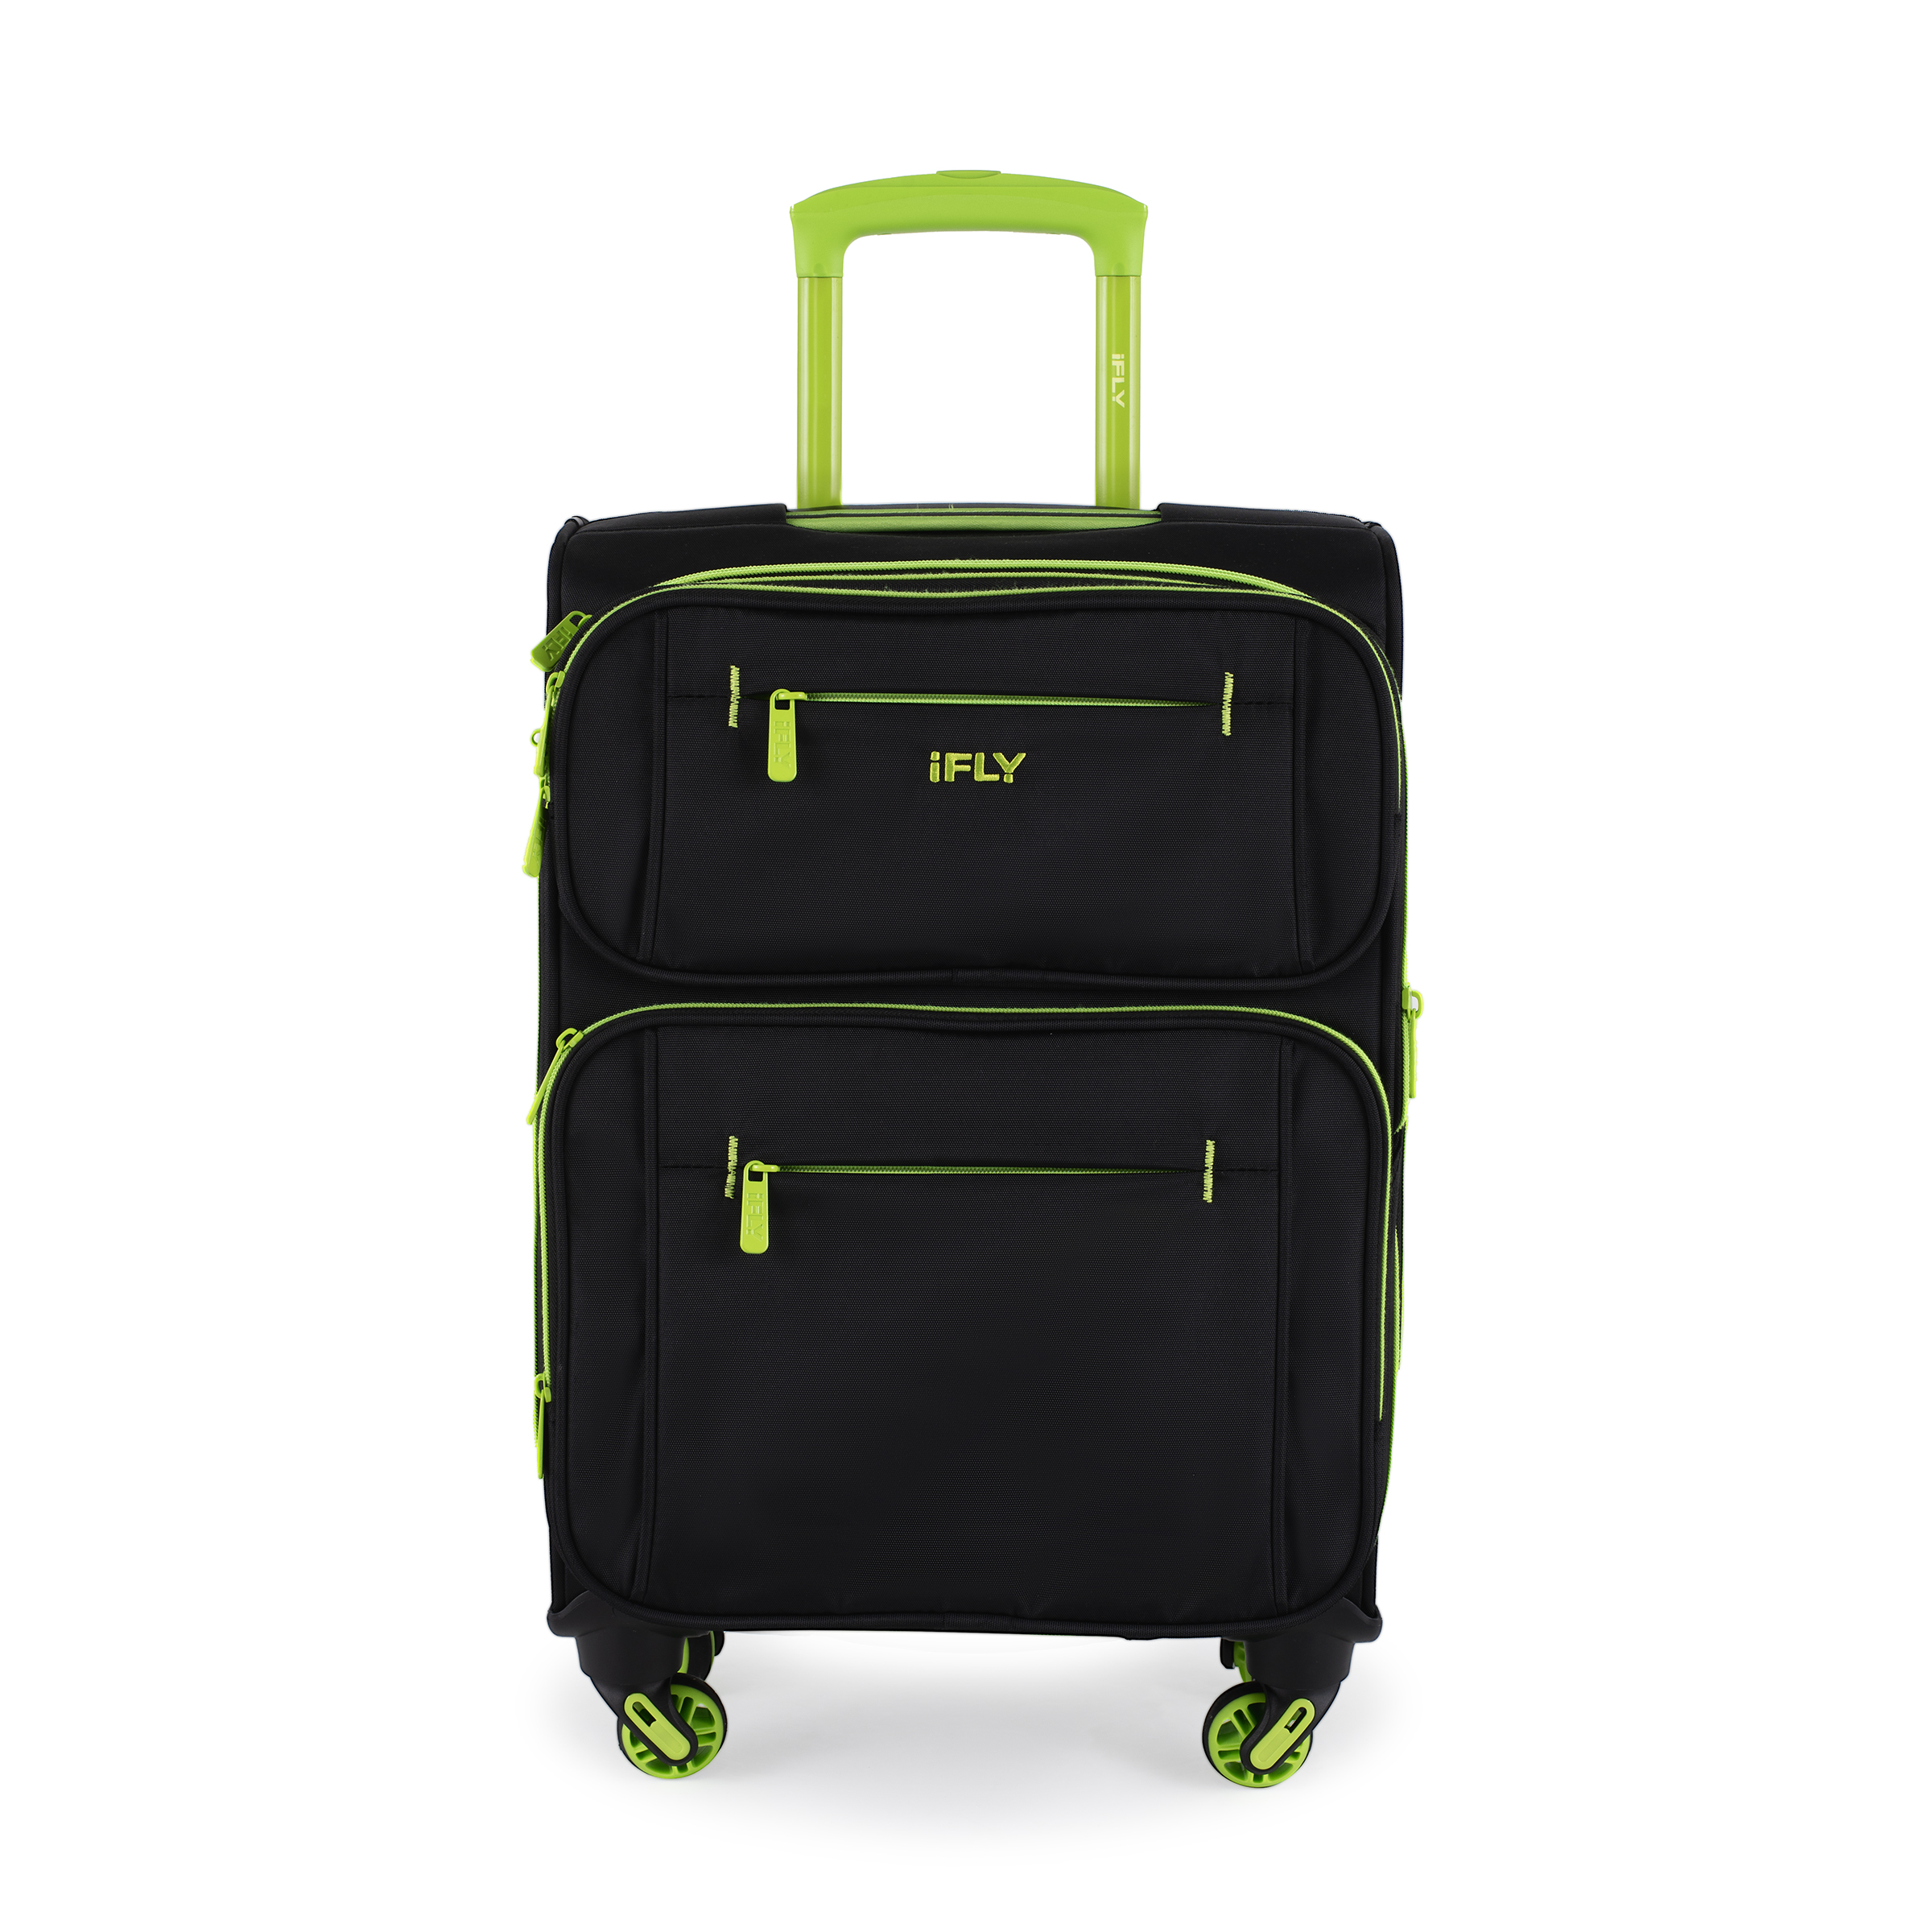 Ifly Softside Accent 20 inch Carry-on Luggage, Black/Lime Green